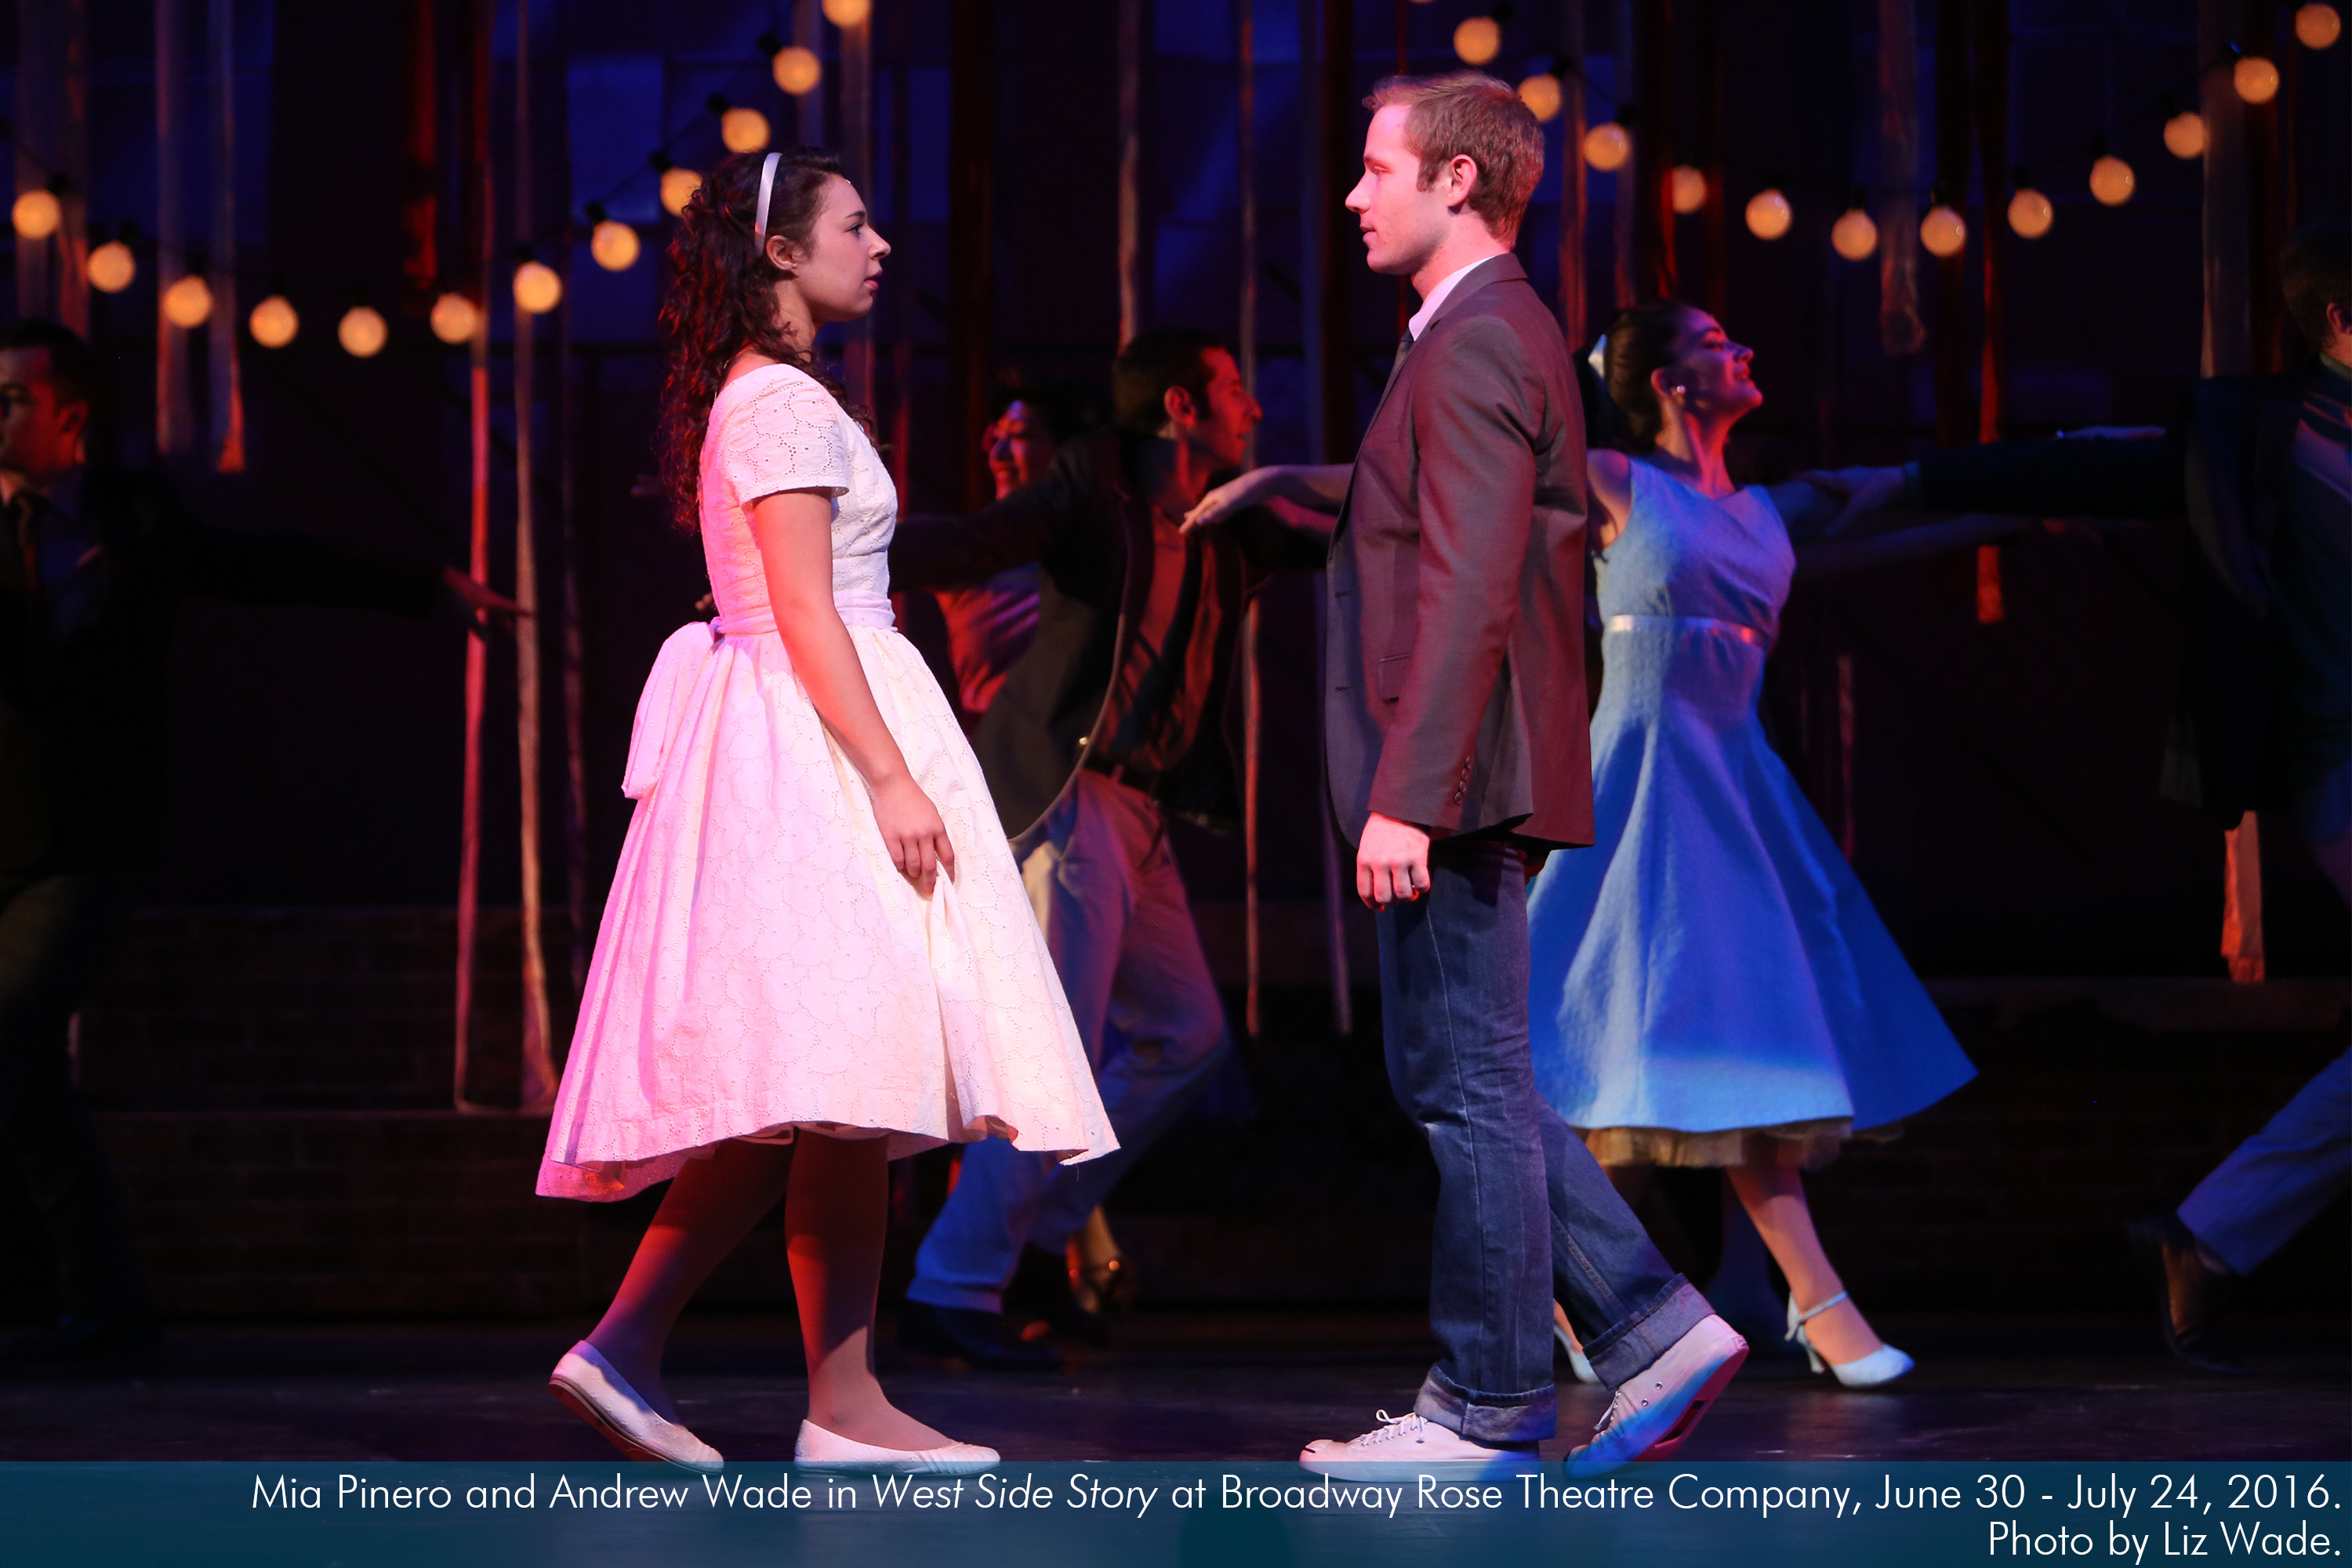 Mia Pinero and Andrew Wade in West Side Story at Broadway Rose Theatre Company. Photo by Liz Wade.